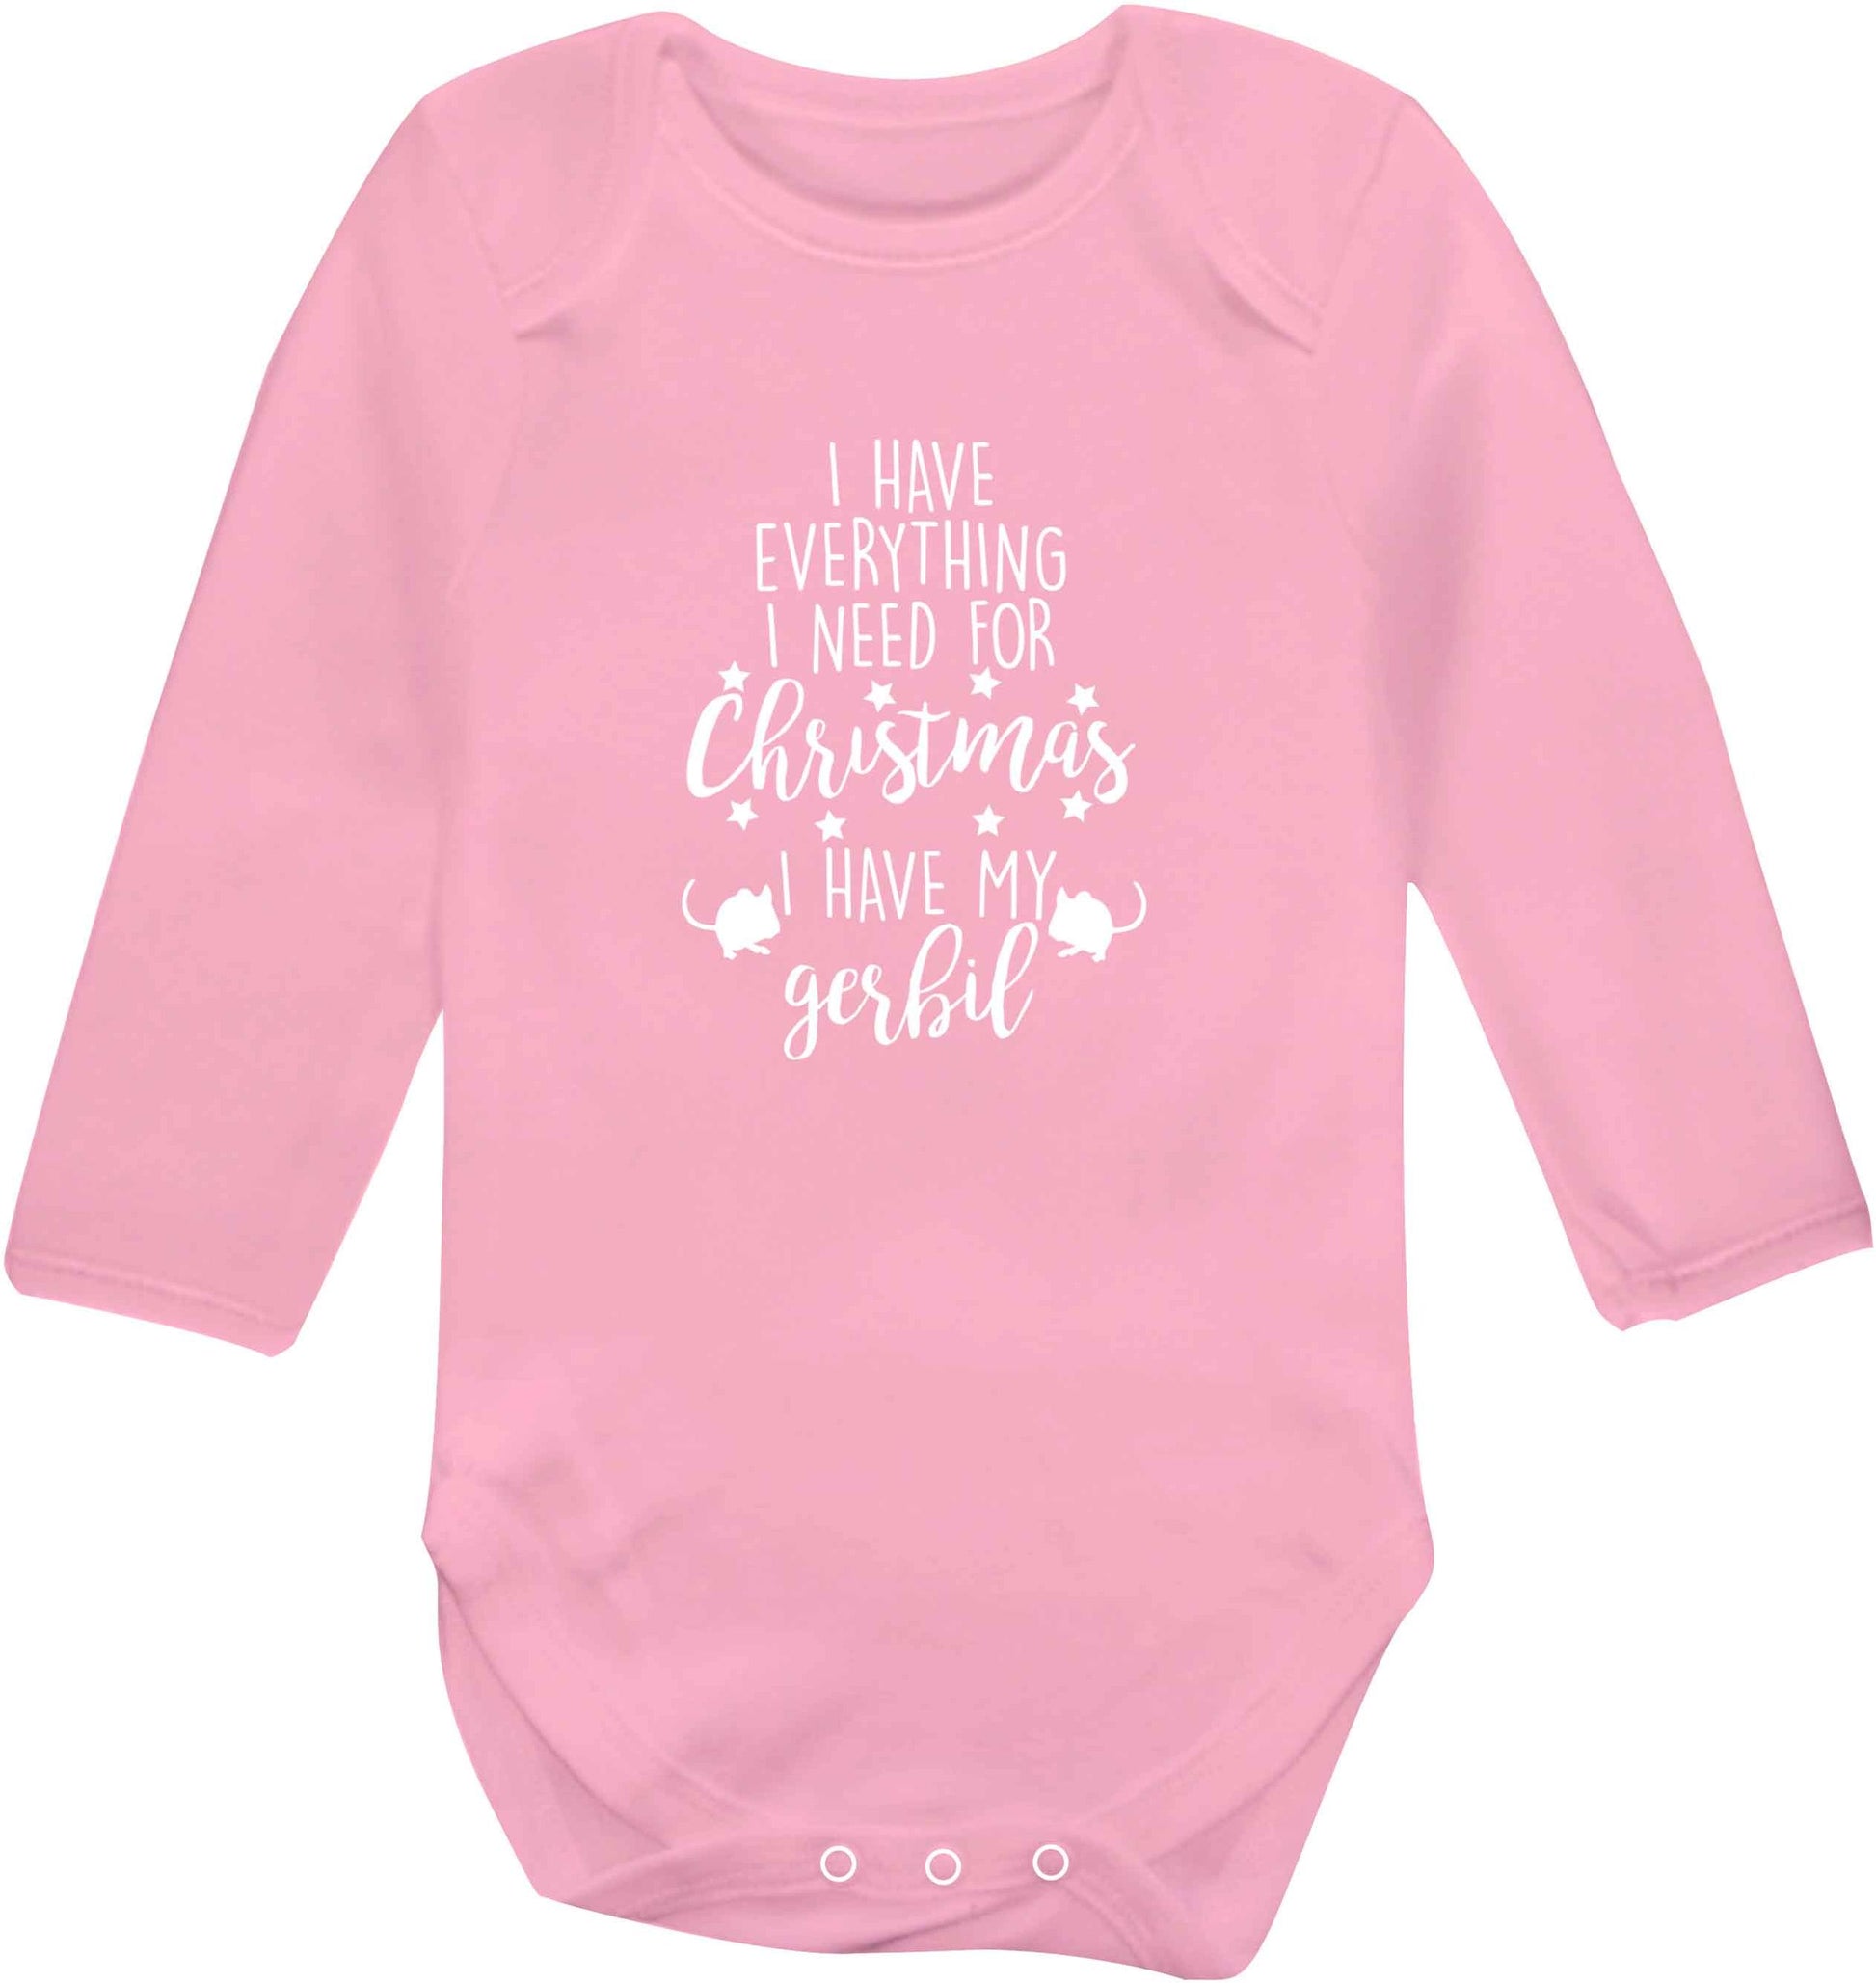 I have everything I need for Christmas I have my gerbil baby vest long sleeved pale pink 6-12 months